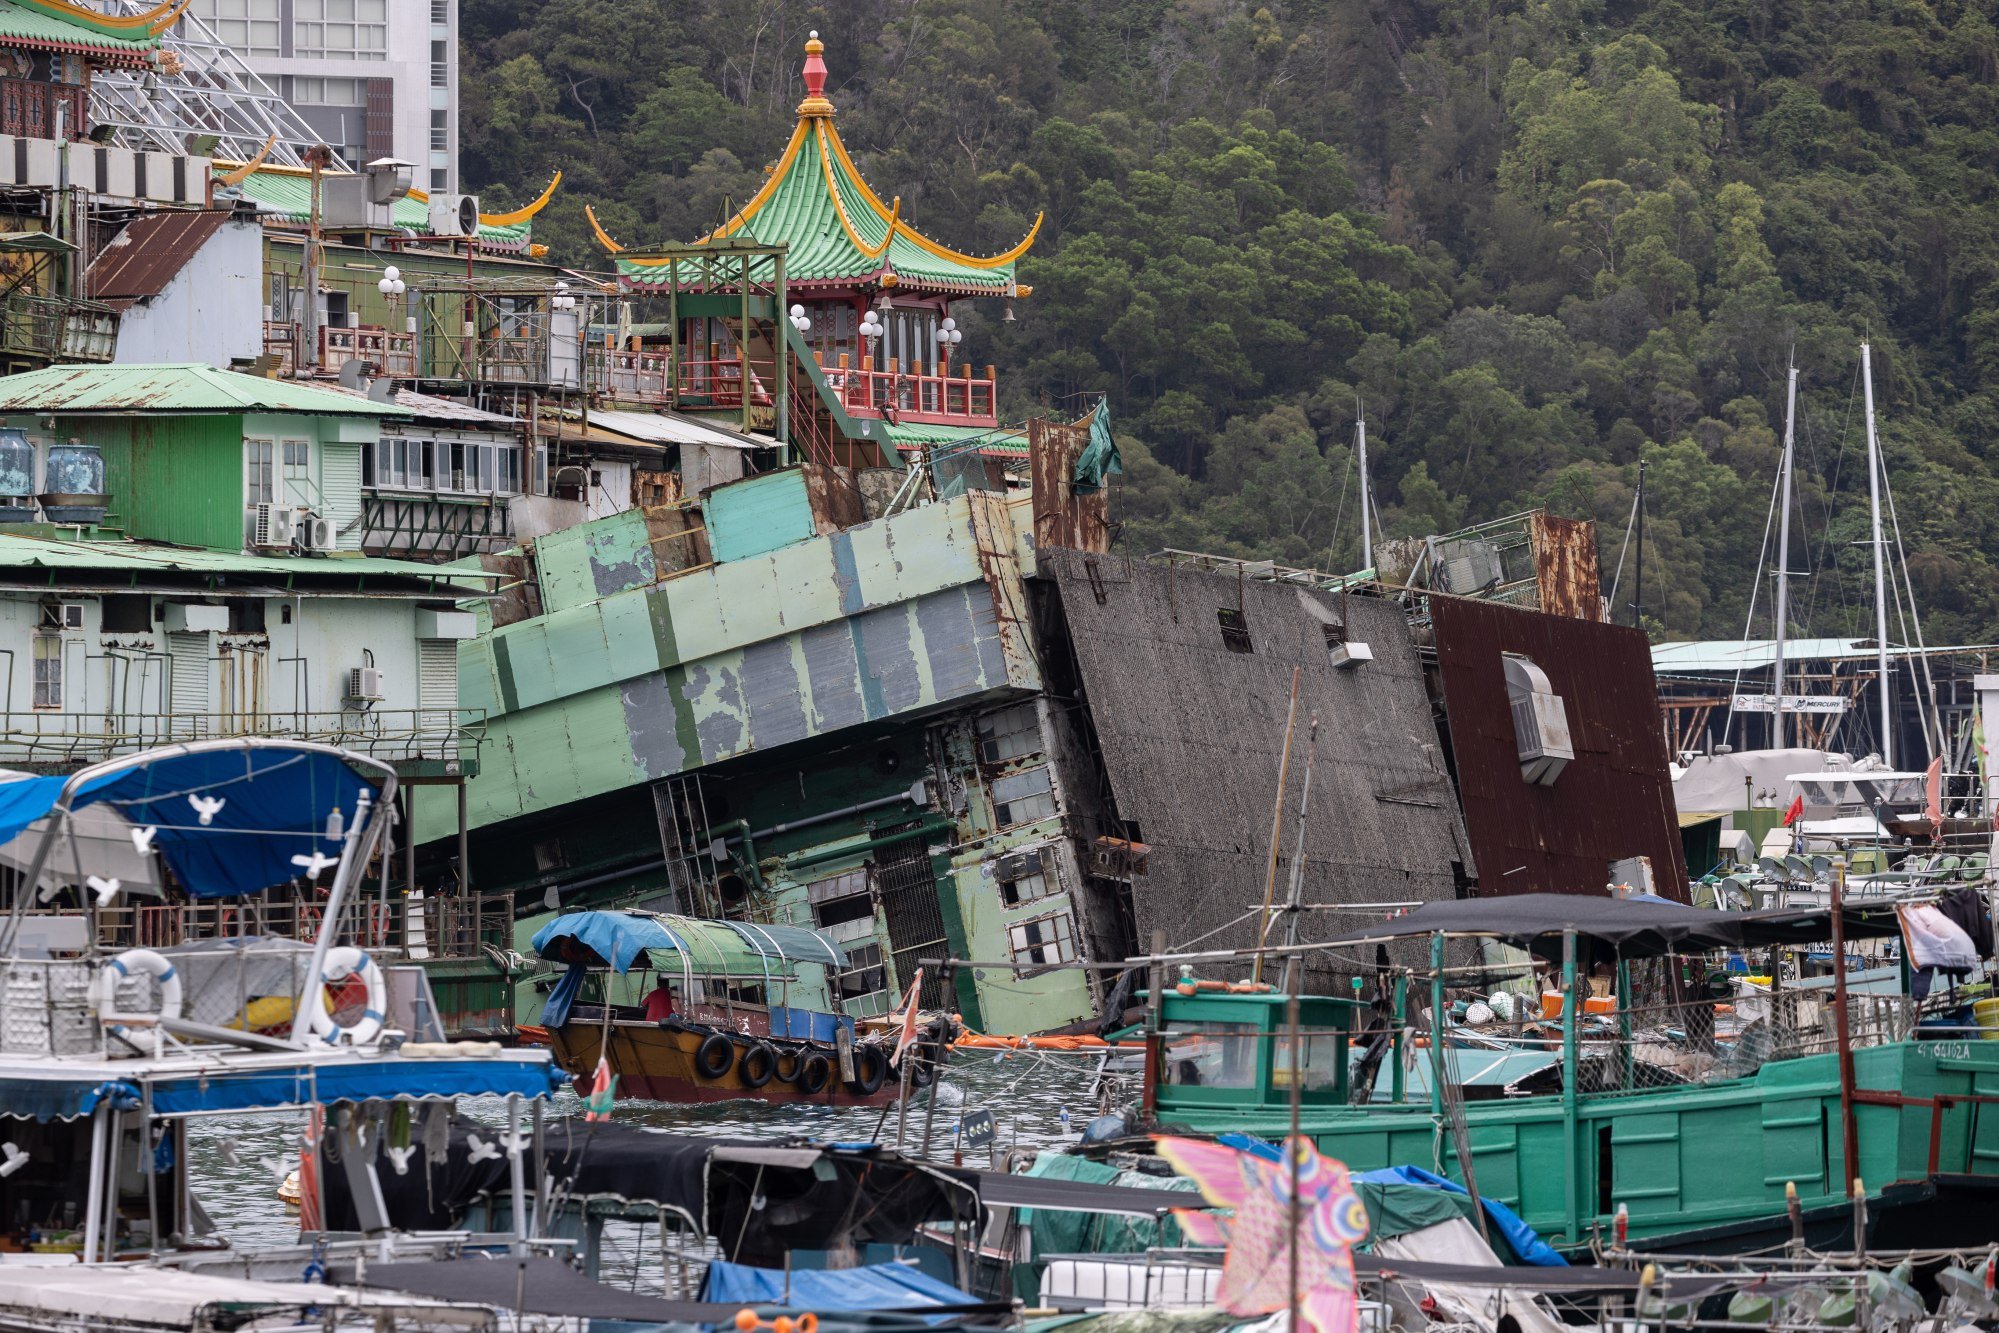 A 30-metre-long kitchen barge connected to the iconic Jumbo Floating Restaurant lies partially submerged after capsizing in Aberdeen, Hong Kong, on June 1. Photo: EPA-EFE